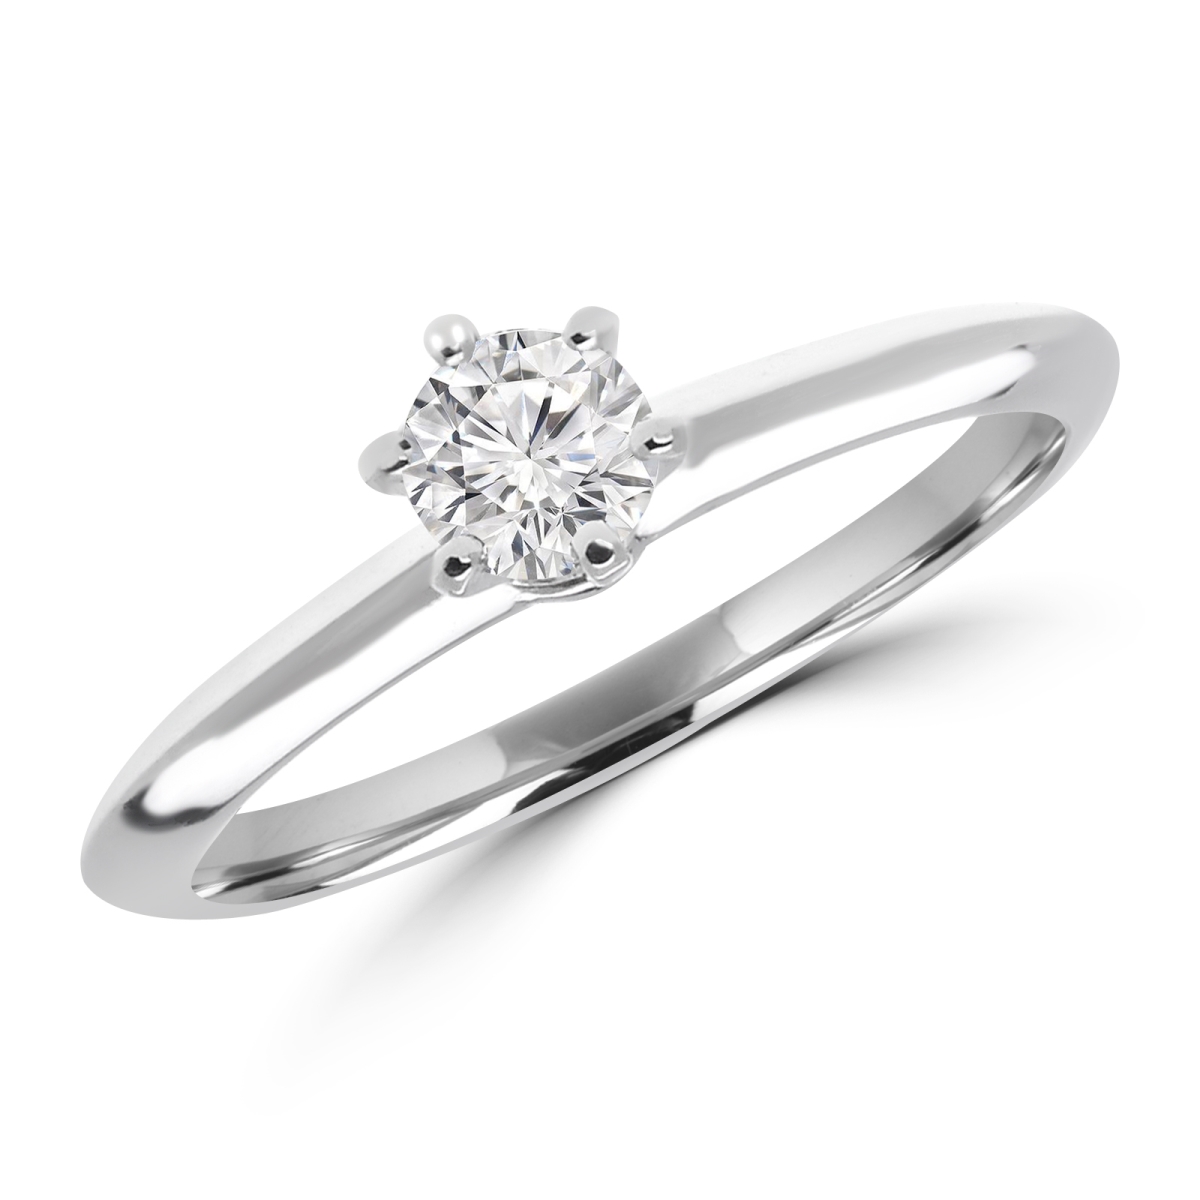 Picture of Majesty Diamonds MD170191-8.5 0.33 CT Round Diamond Solitaire Engagement Ring in 10K White Gold - Size 8.5